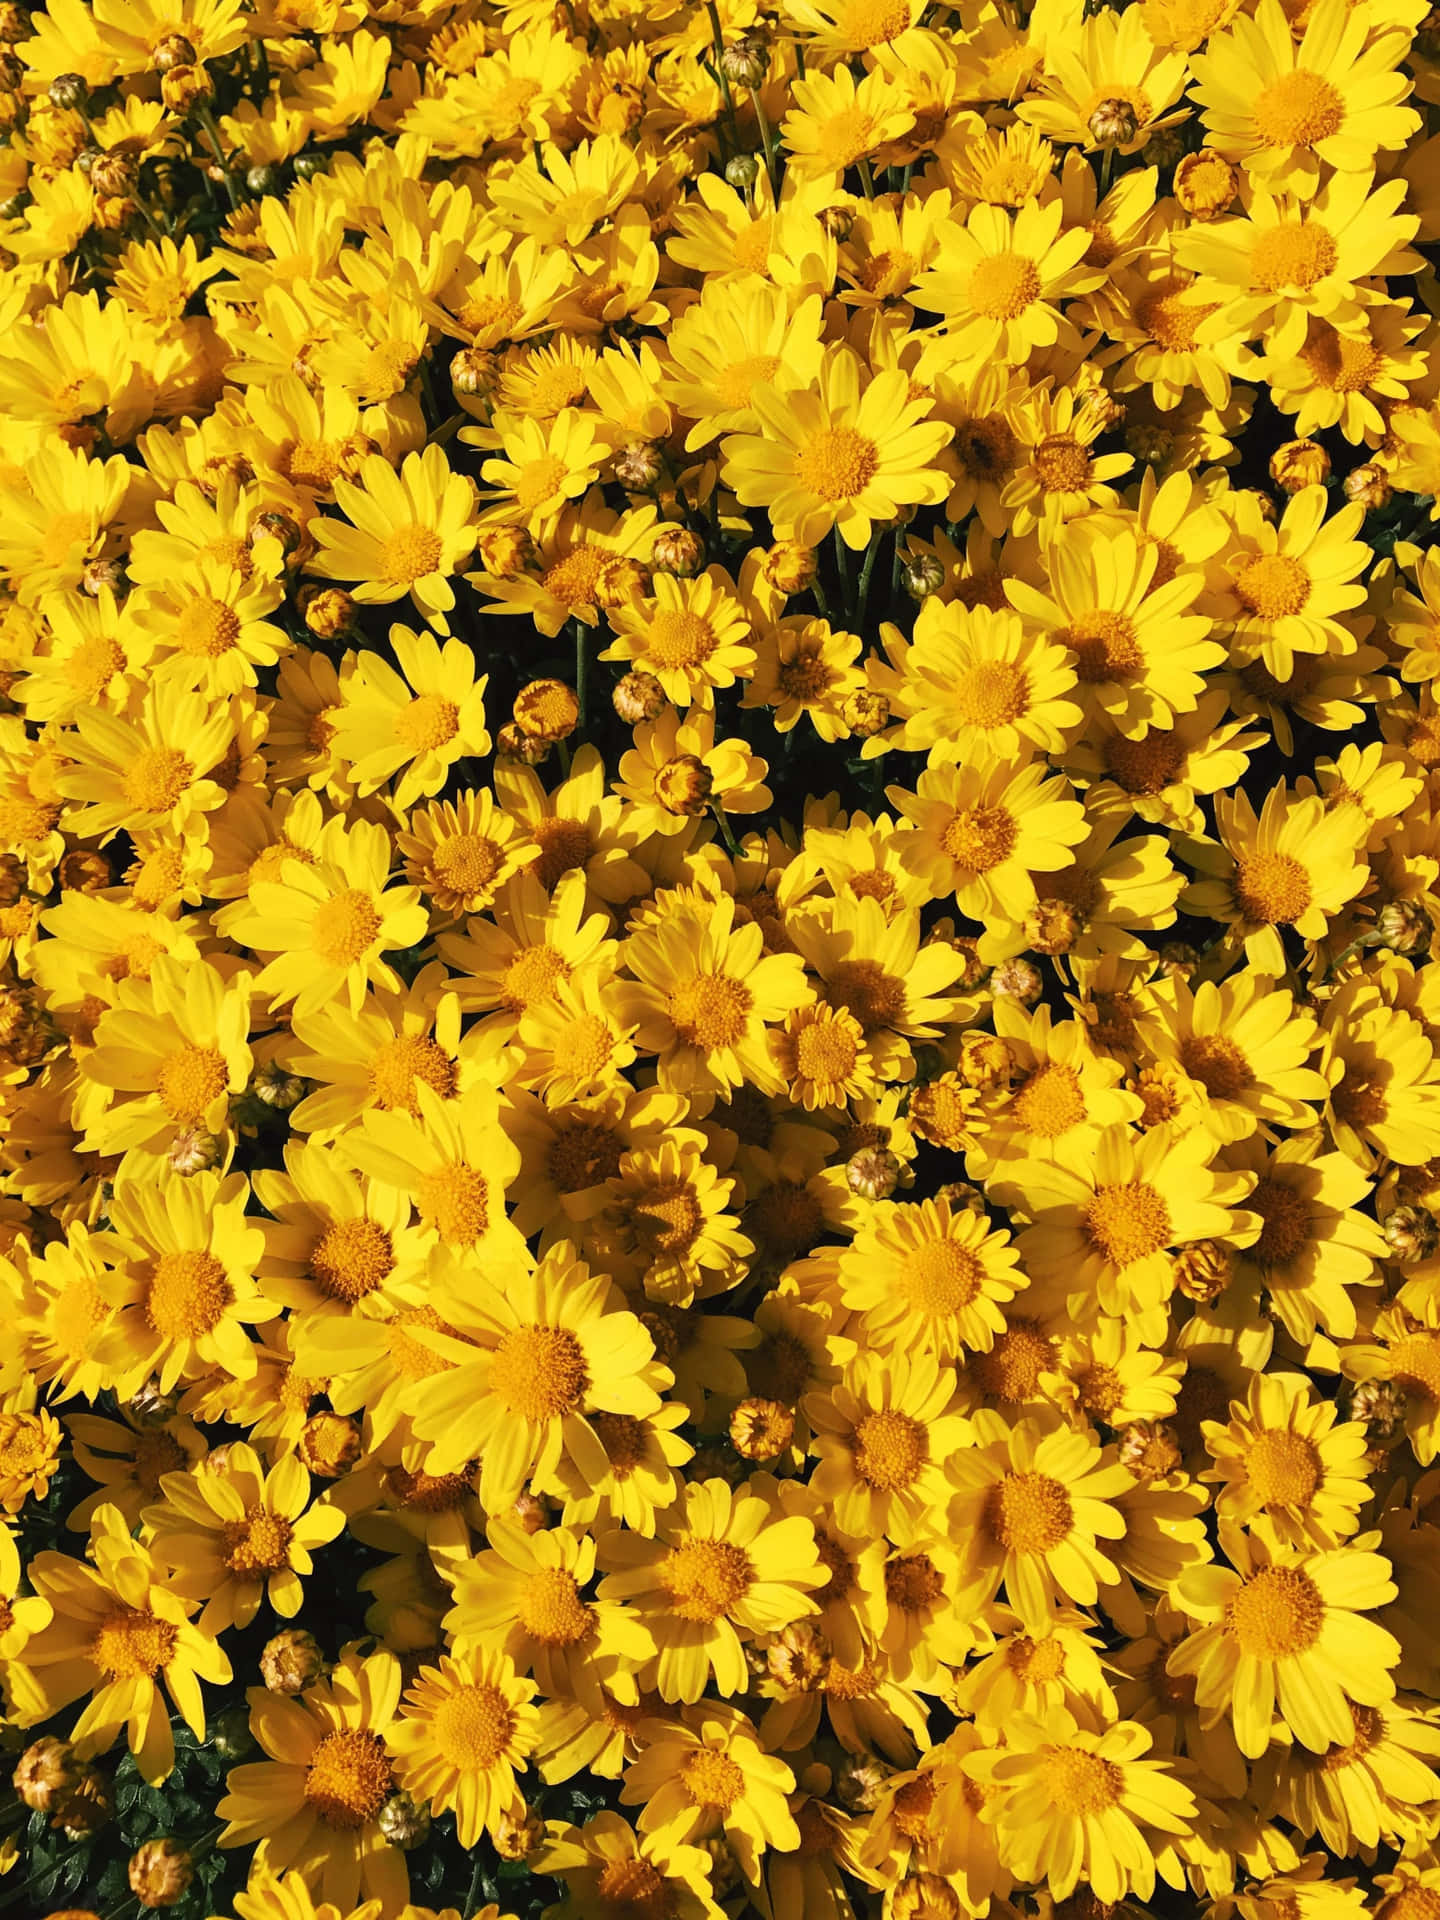 A field of vibrant yellow and white aesthetic flowers.